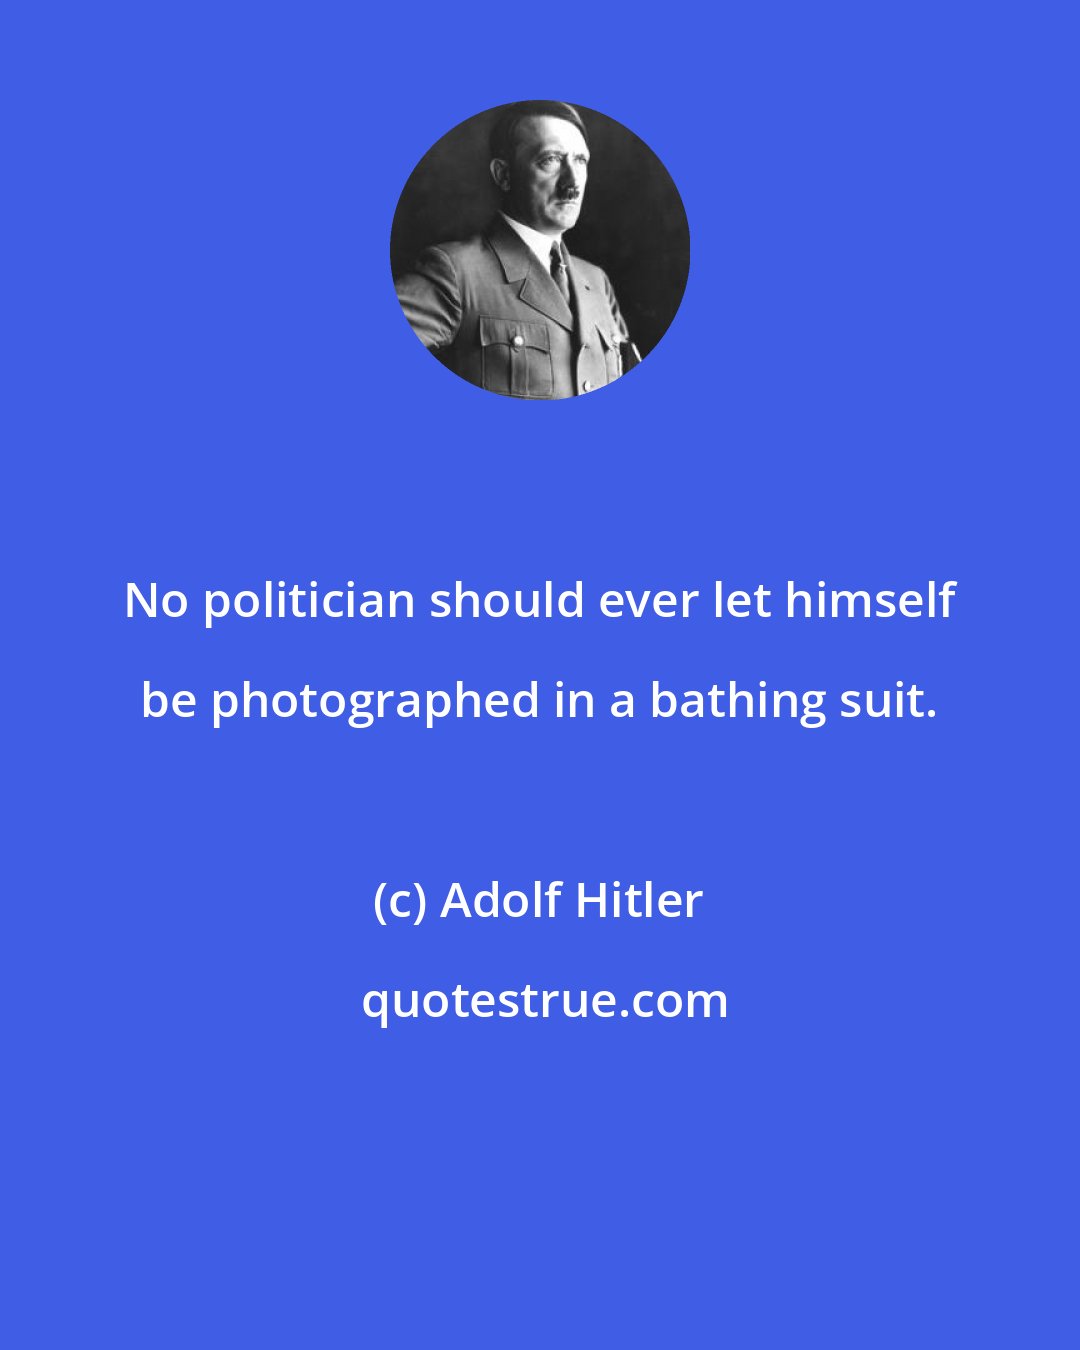 Adolf Hitler: No politician should ever let himself be photographed in a bathing suit.